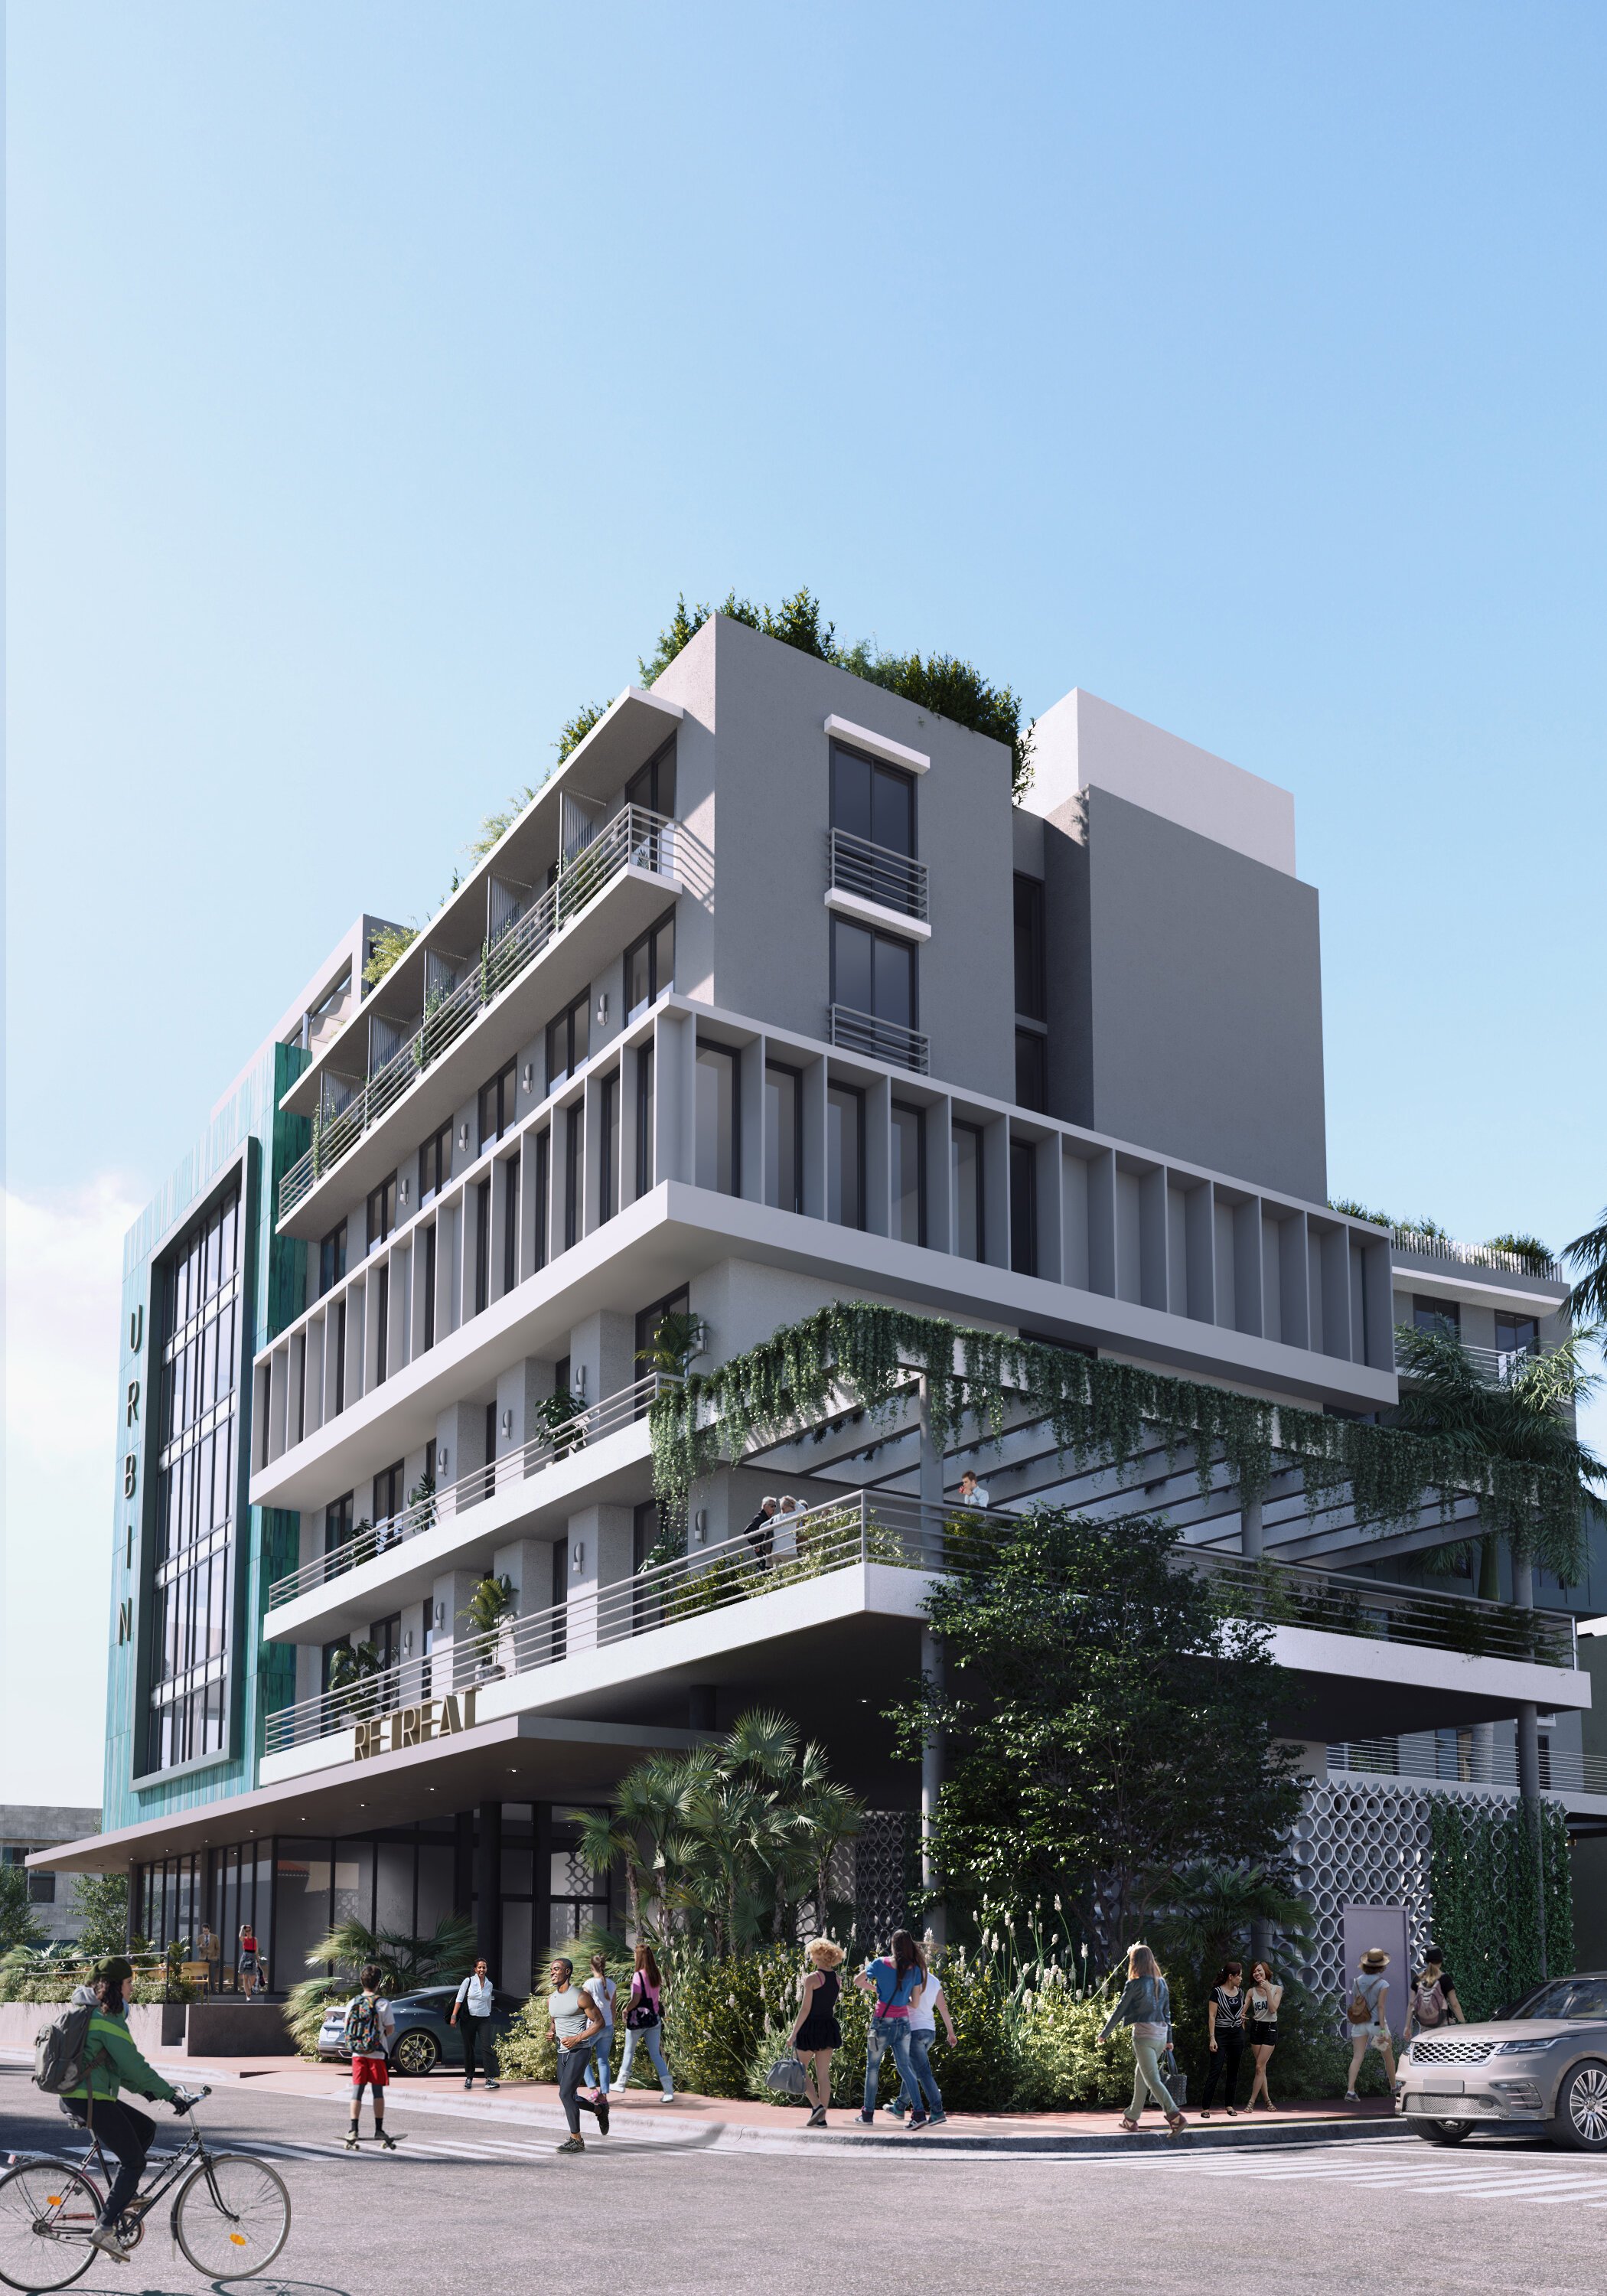 Location Ventures Announces Sellout of URBIN Miami Beach Mixed-Use Condo, Co-Working Lifestyle Project2.jpeg